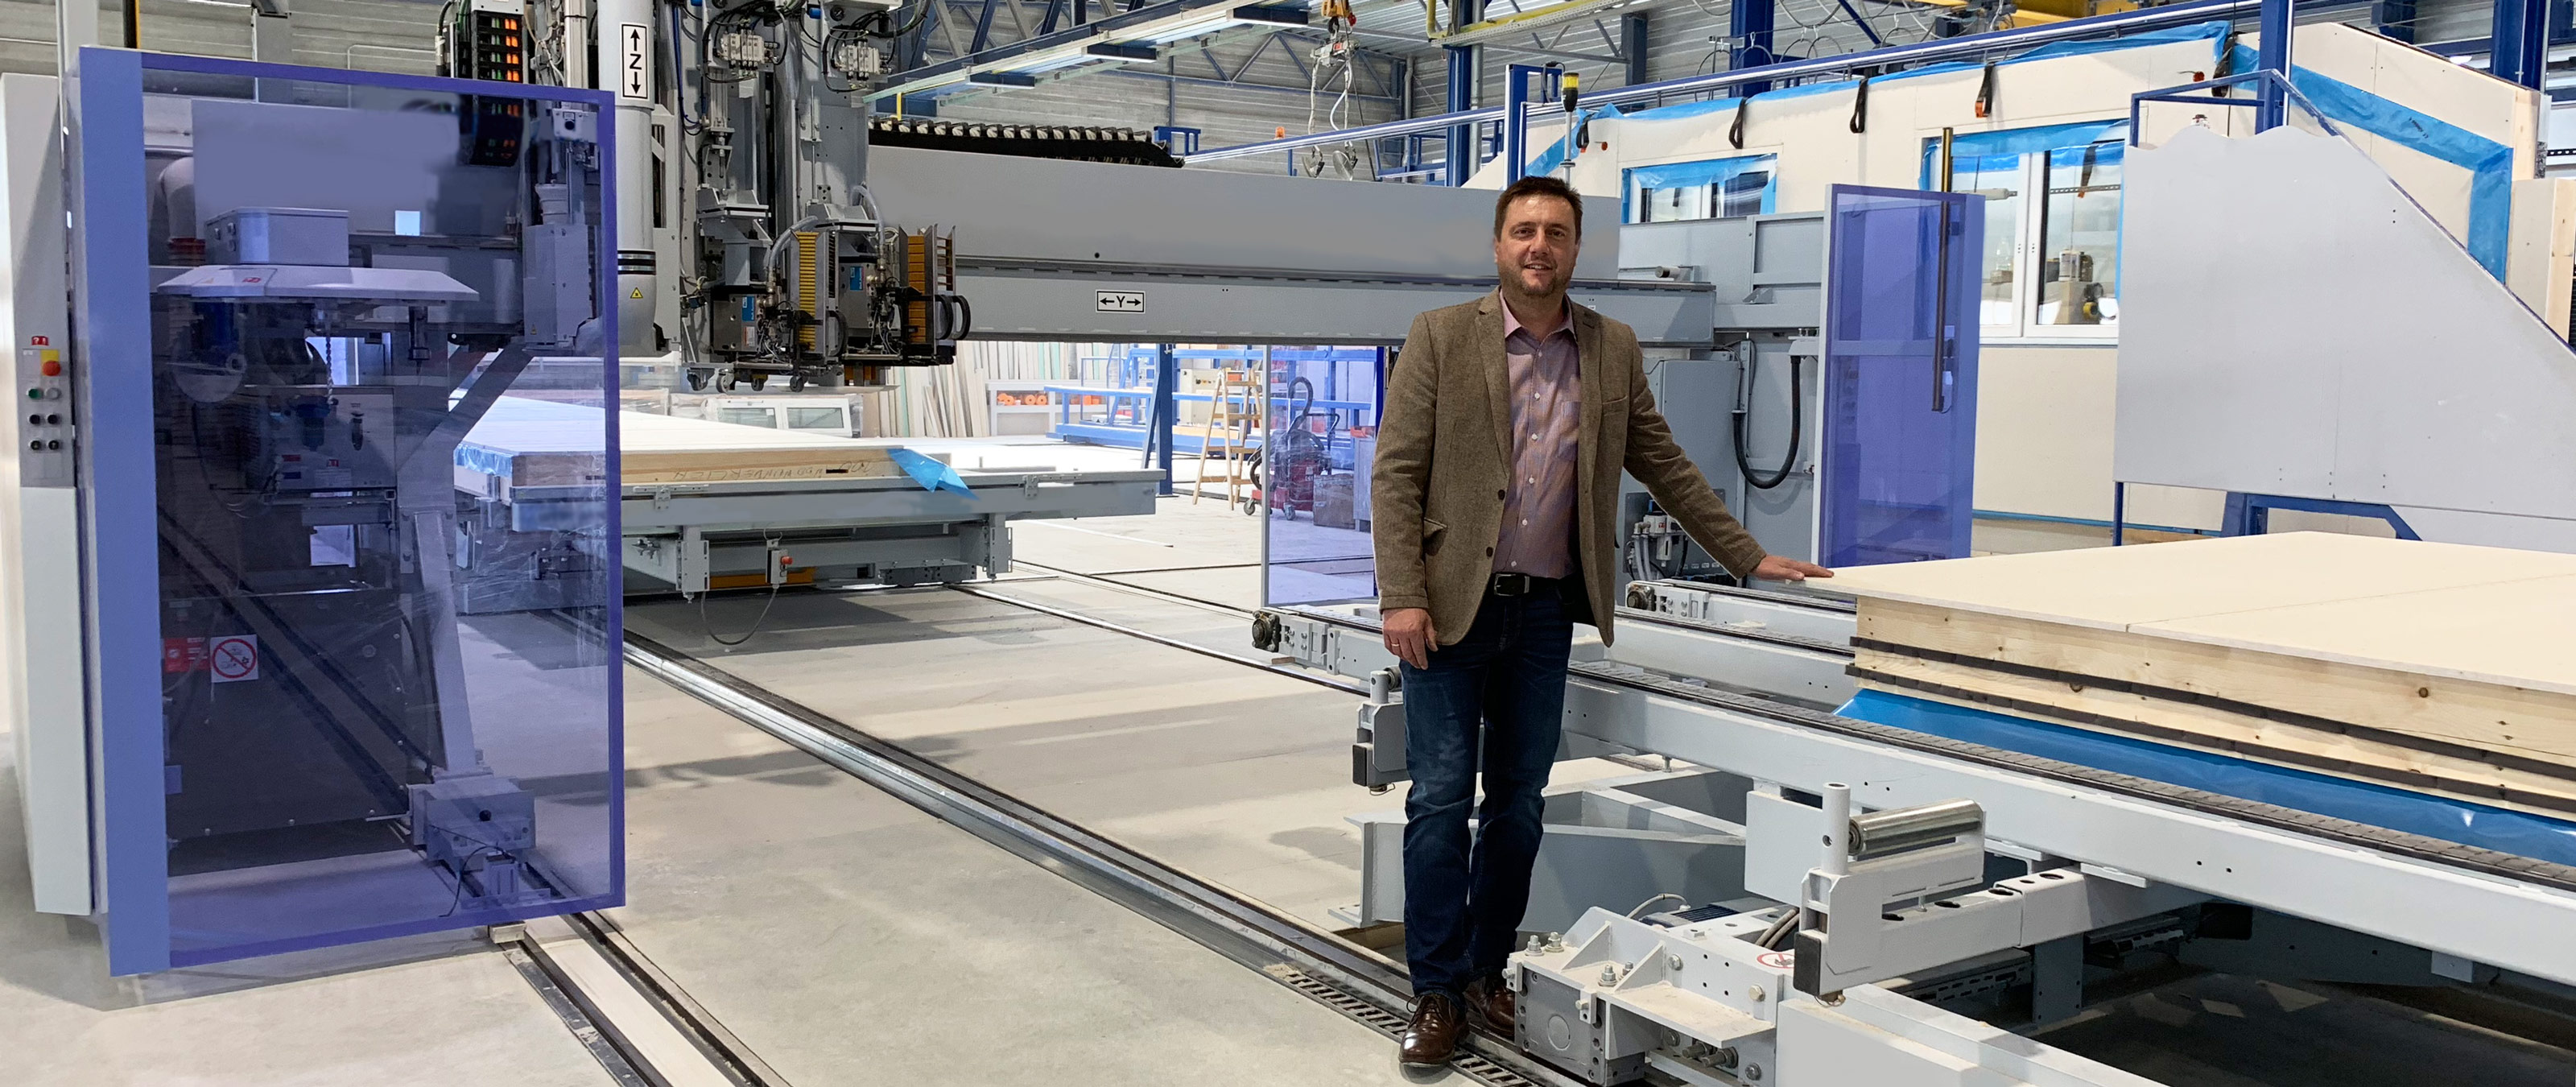 As the production manager at the Schrems site in Austria, Markus Schandl has been the driving force behind the modernization of the production process.